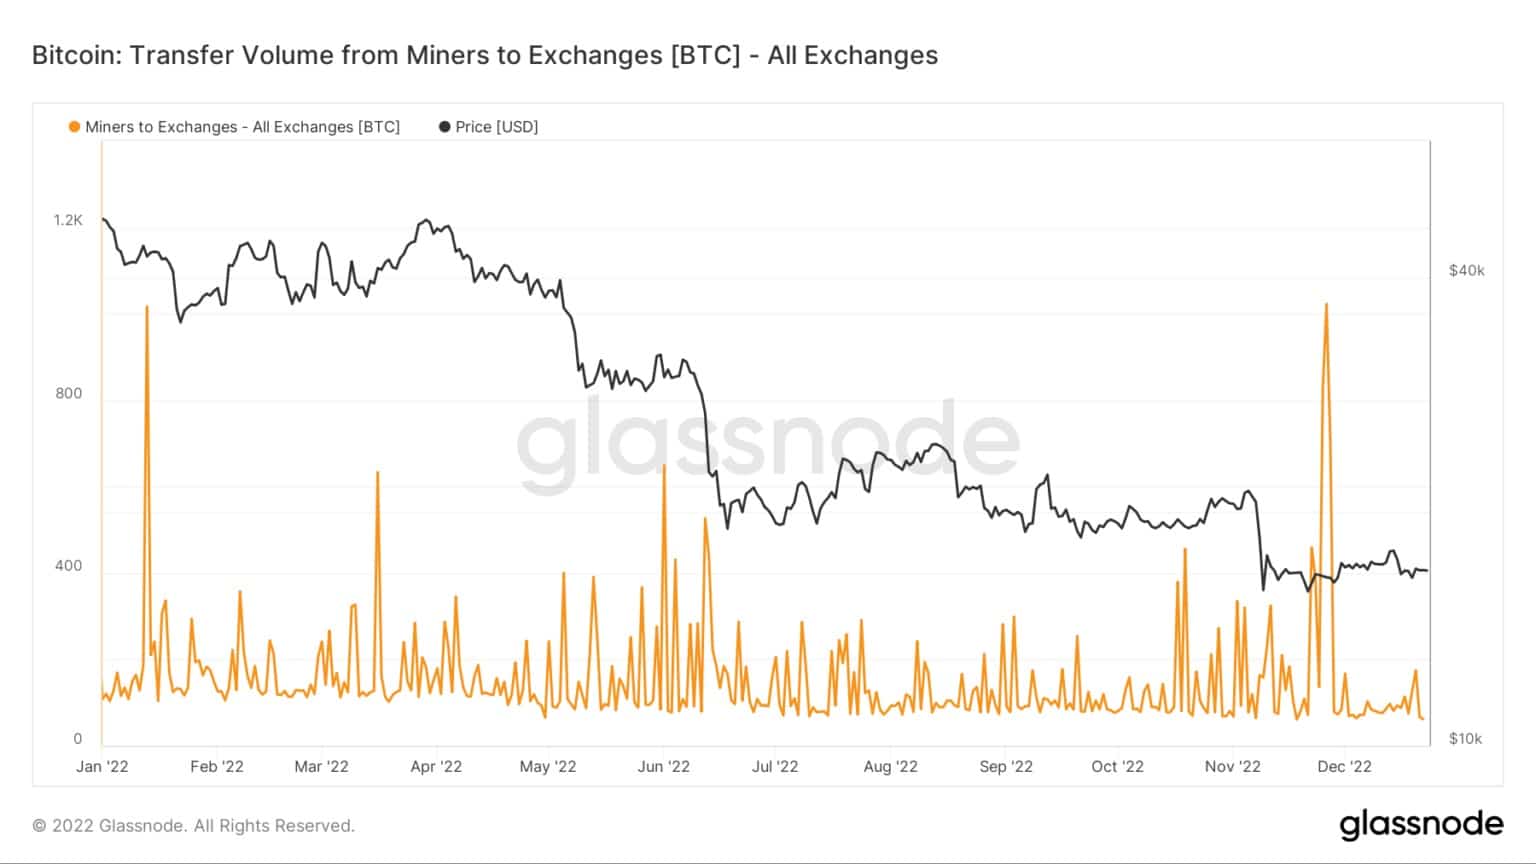 Bitcoin: Transfer Volume from Miners to Exchanges / Bron: Glassnode